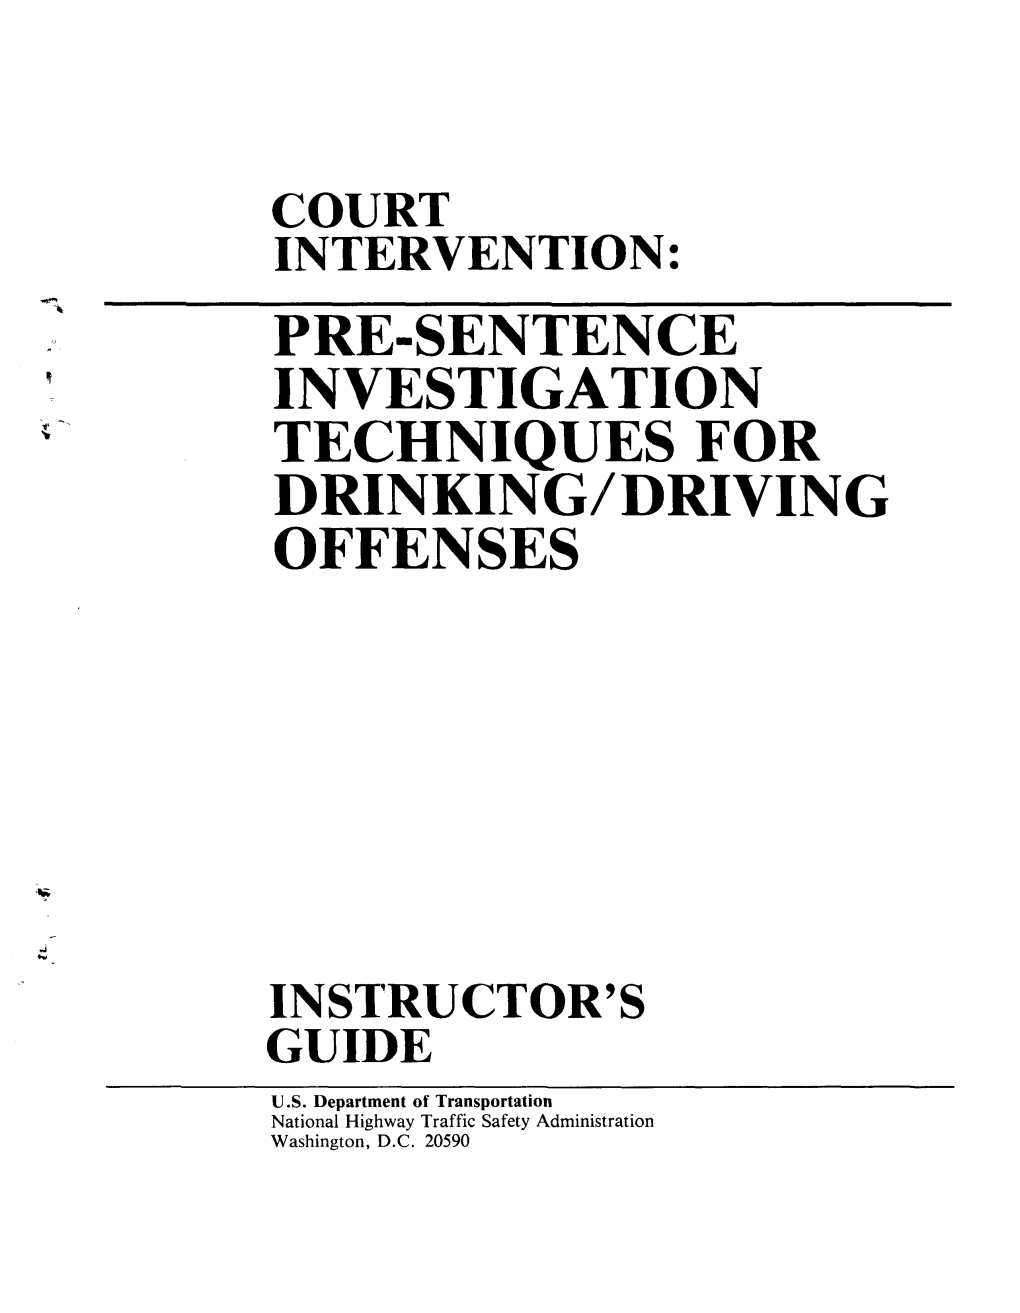 Pre-Sentence Investigation Techniques for Drinking/Driving Offenses